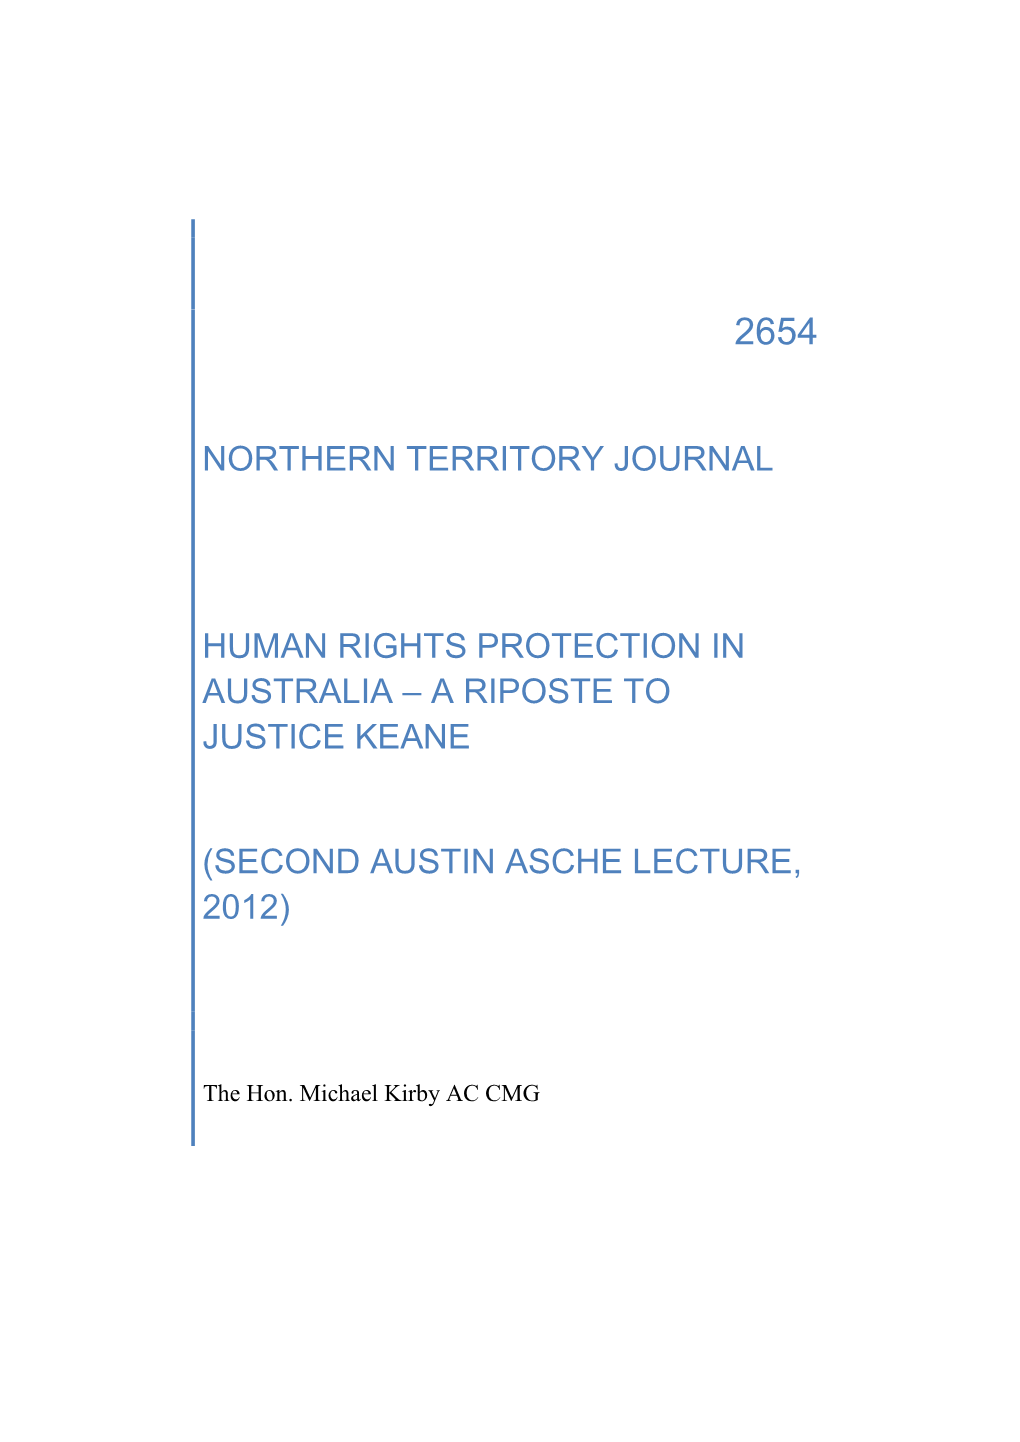 Northern Territory Law Journal